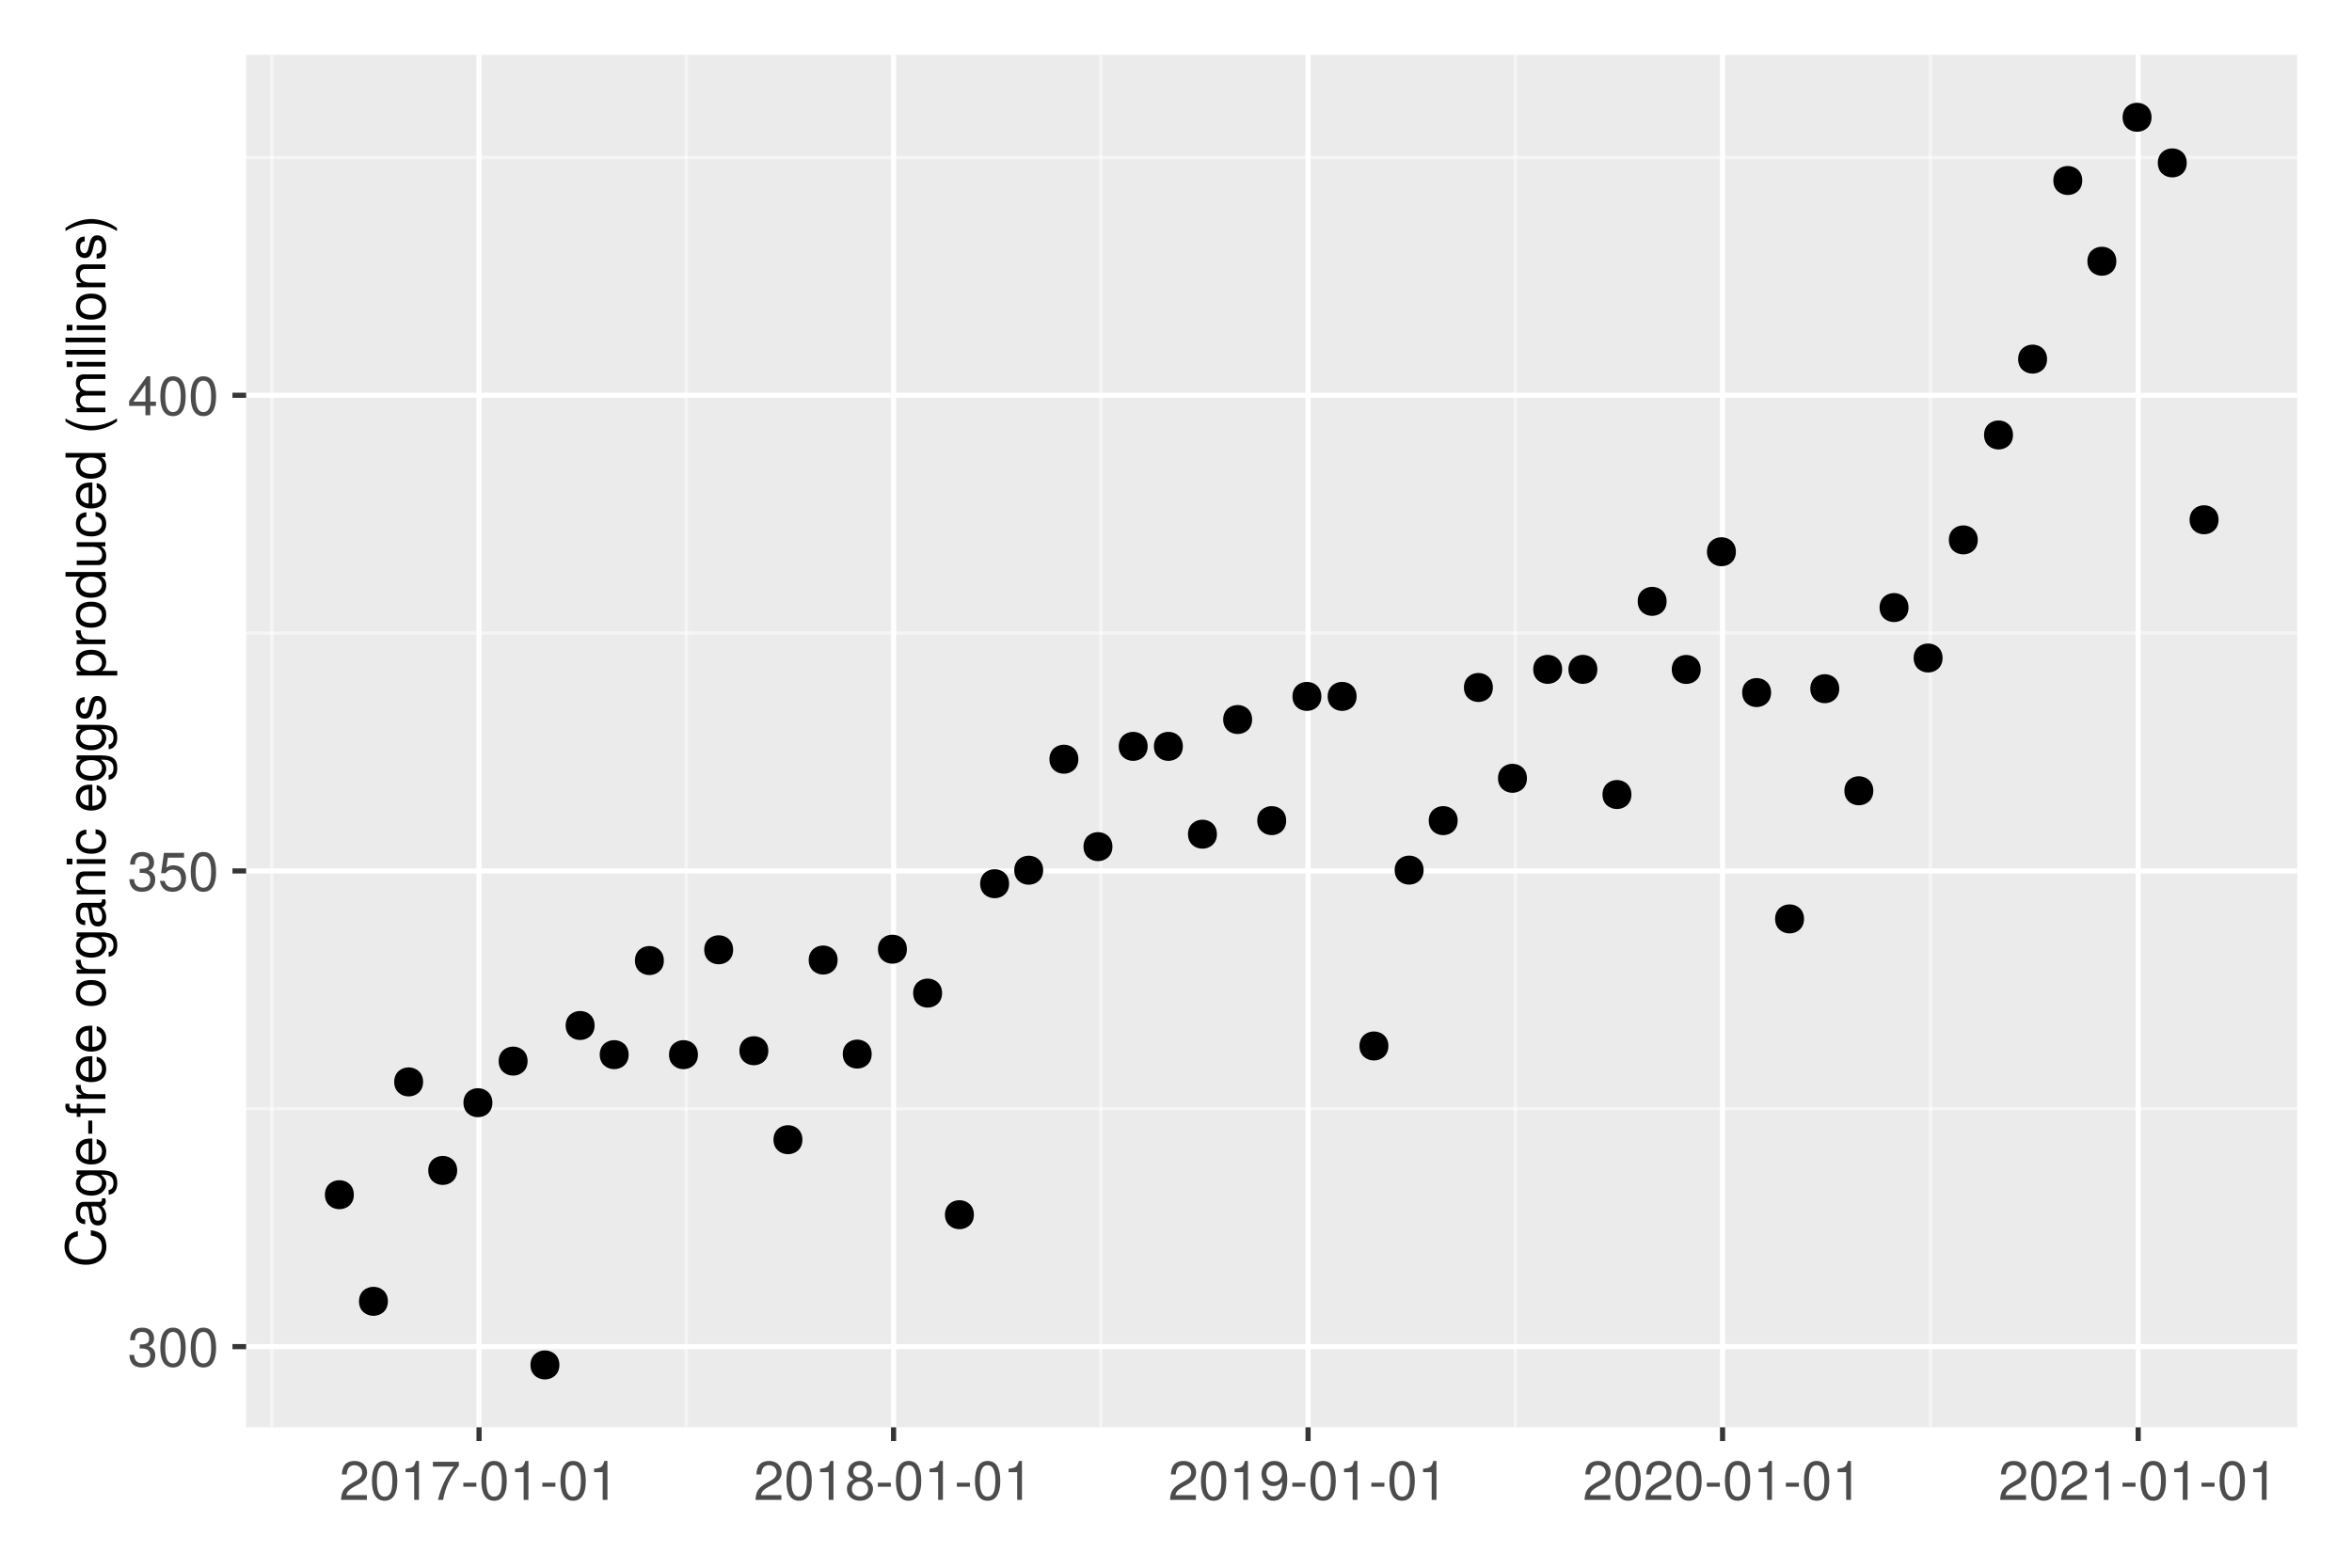 Plot of time on x axis vs number of cage free organic eggs in USA produced in y axis showing seasonality and increasing trend. Plot made in Julia.